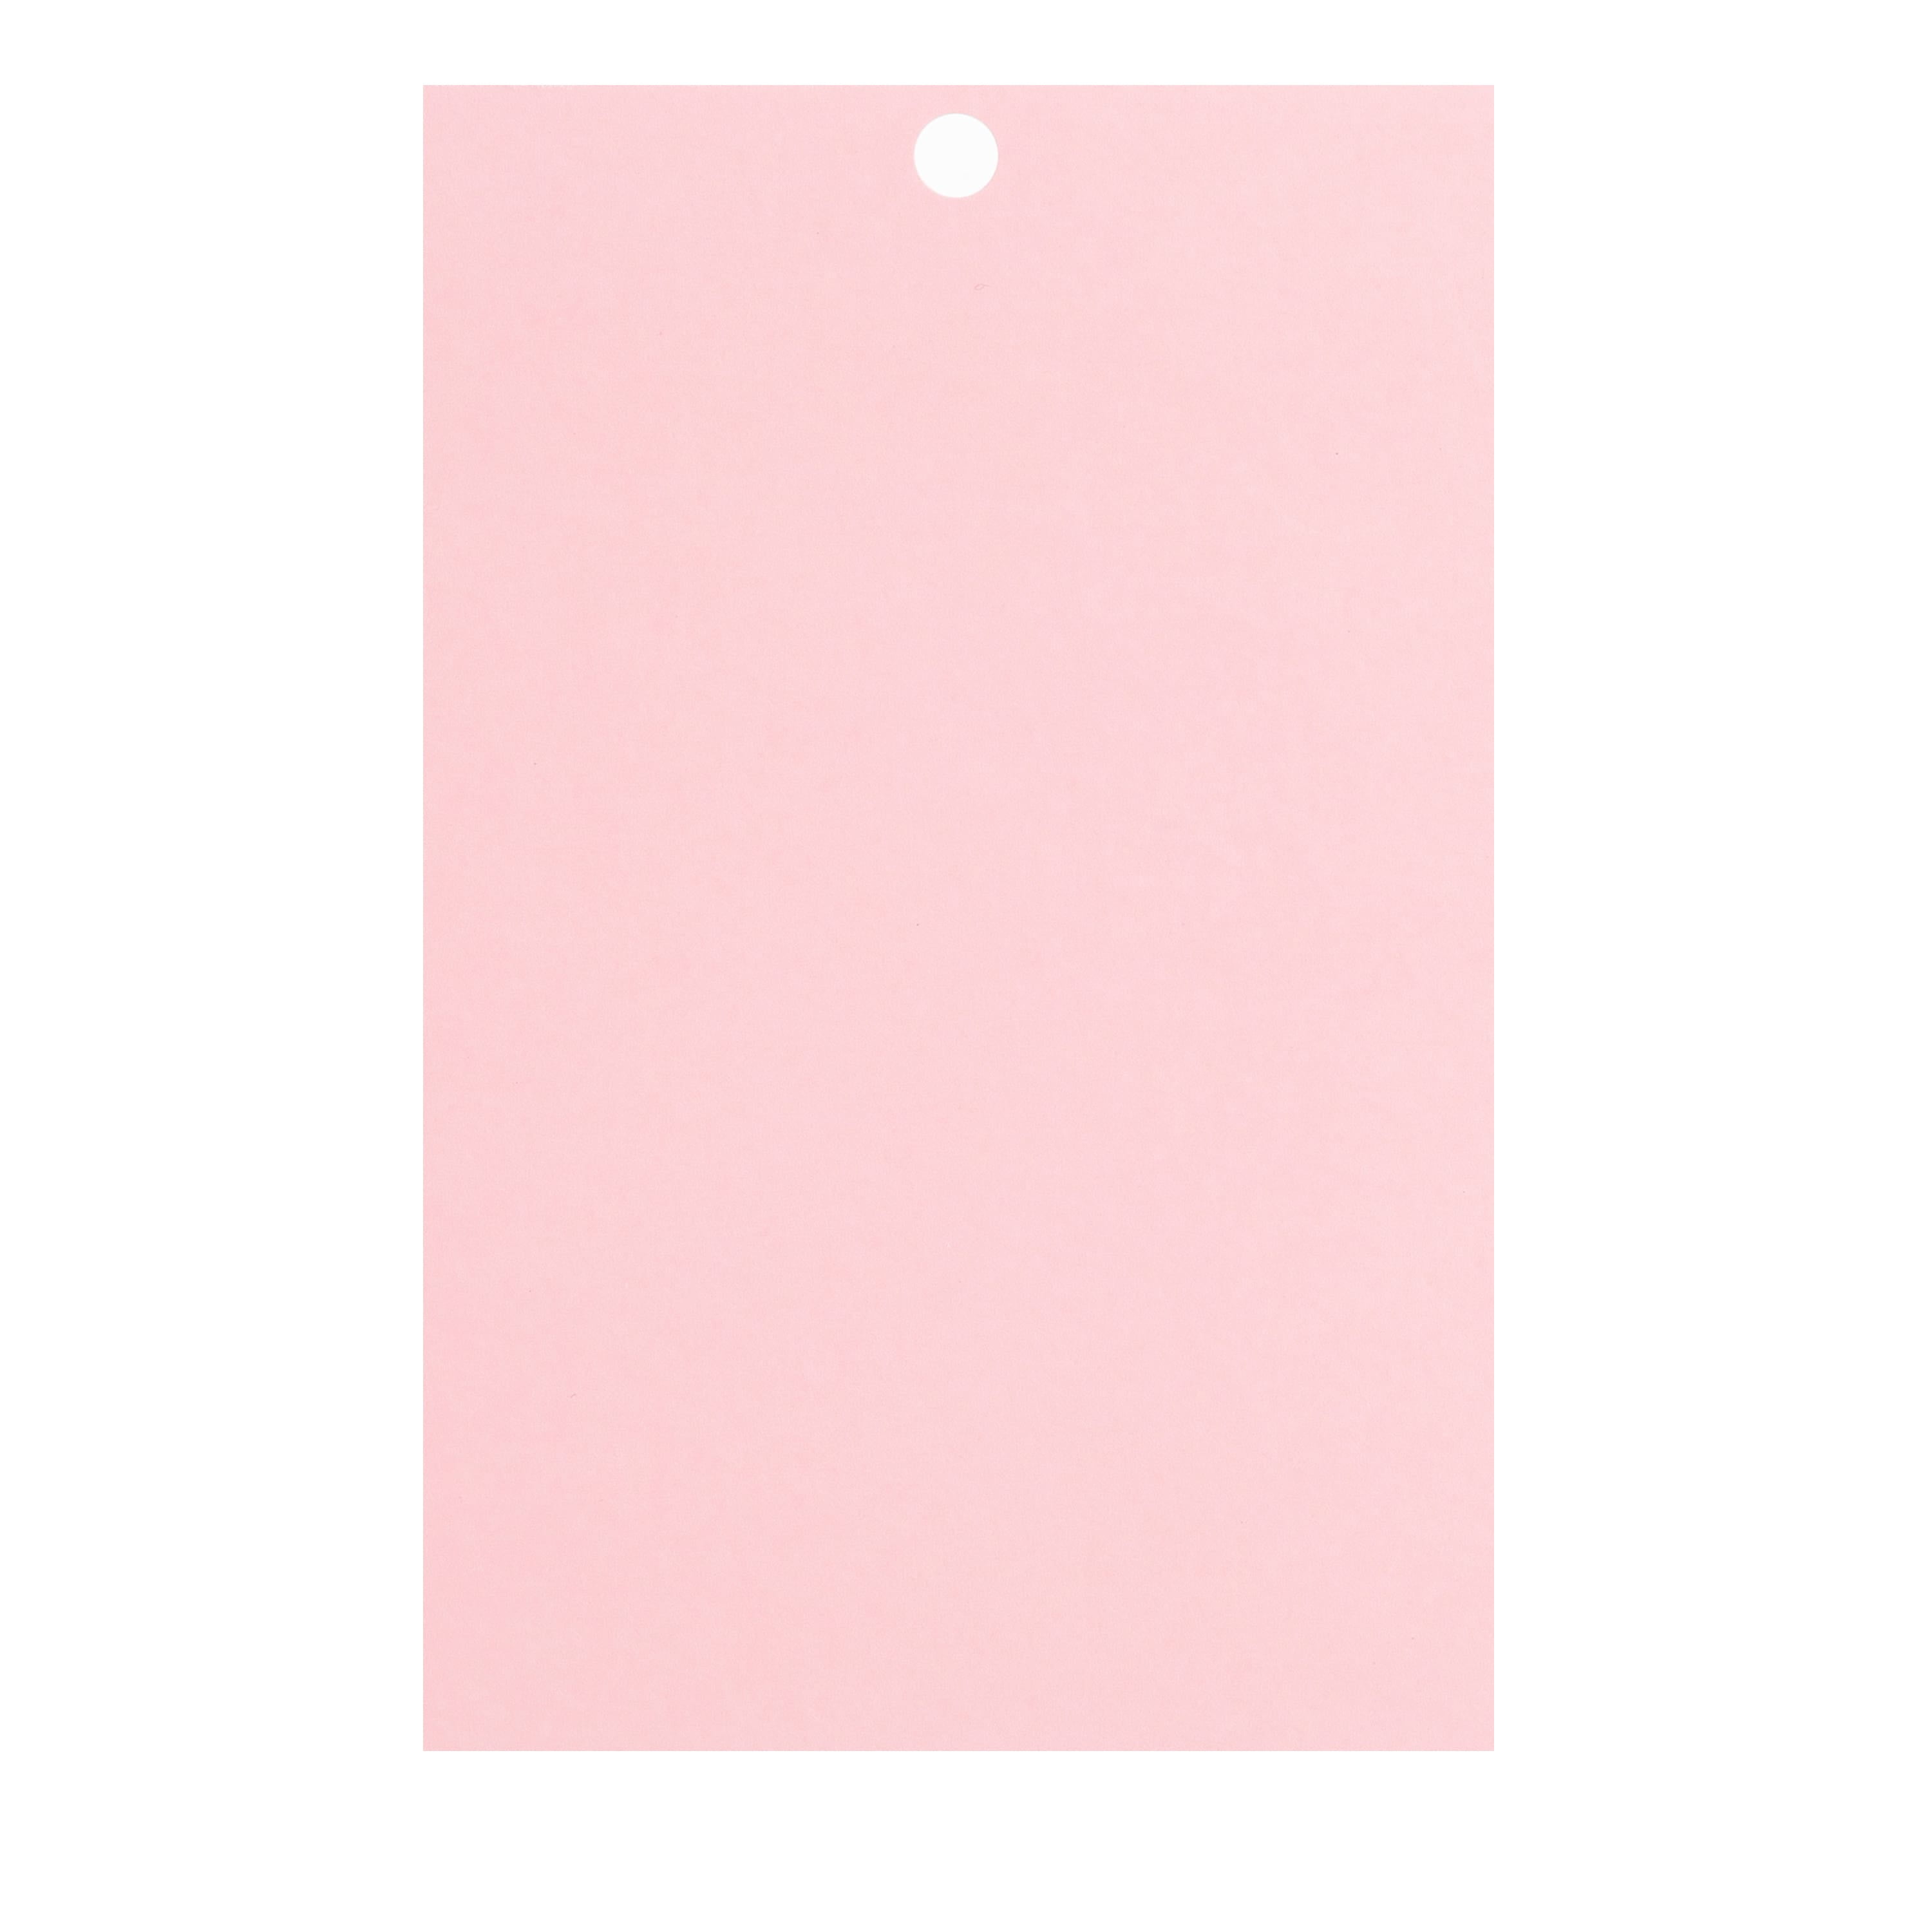 12 Packs: 100 ct. (1,200 total) Pink Buttons 4.5 x 7 Cardstock